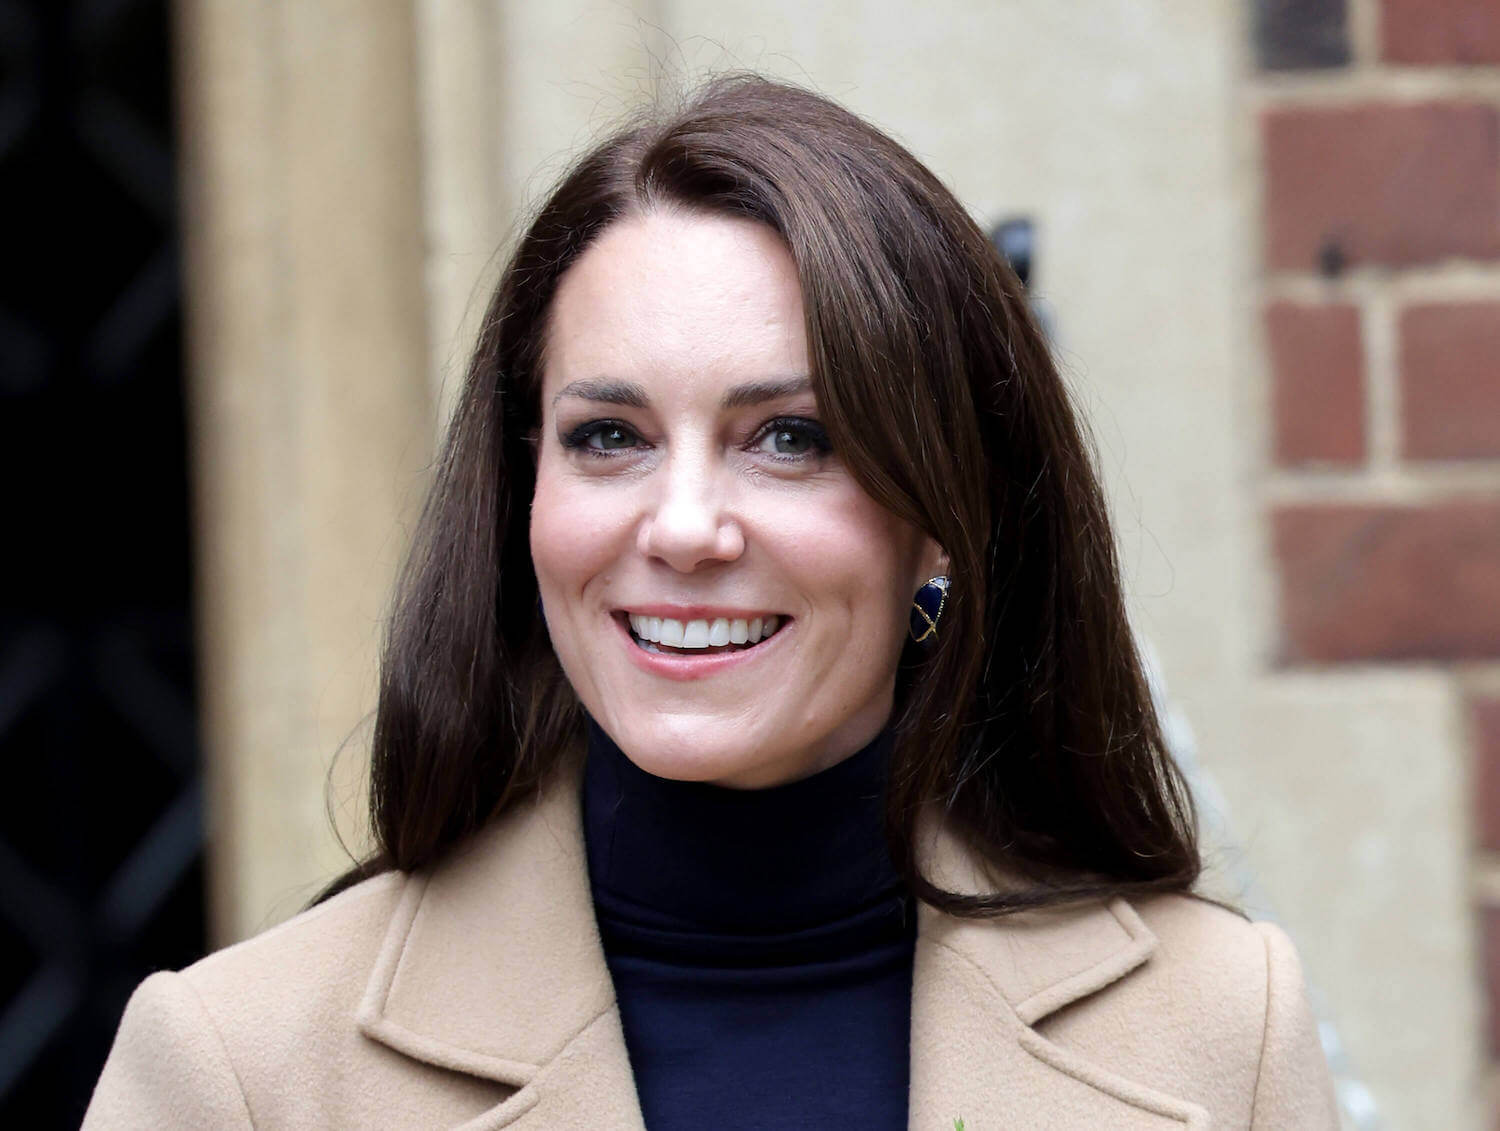 3 Beauty Tricks Kate Middleton Uses for an Ageless Look